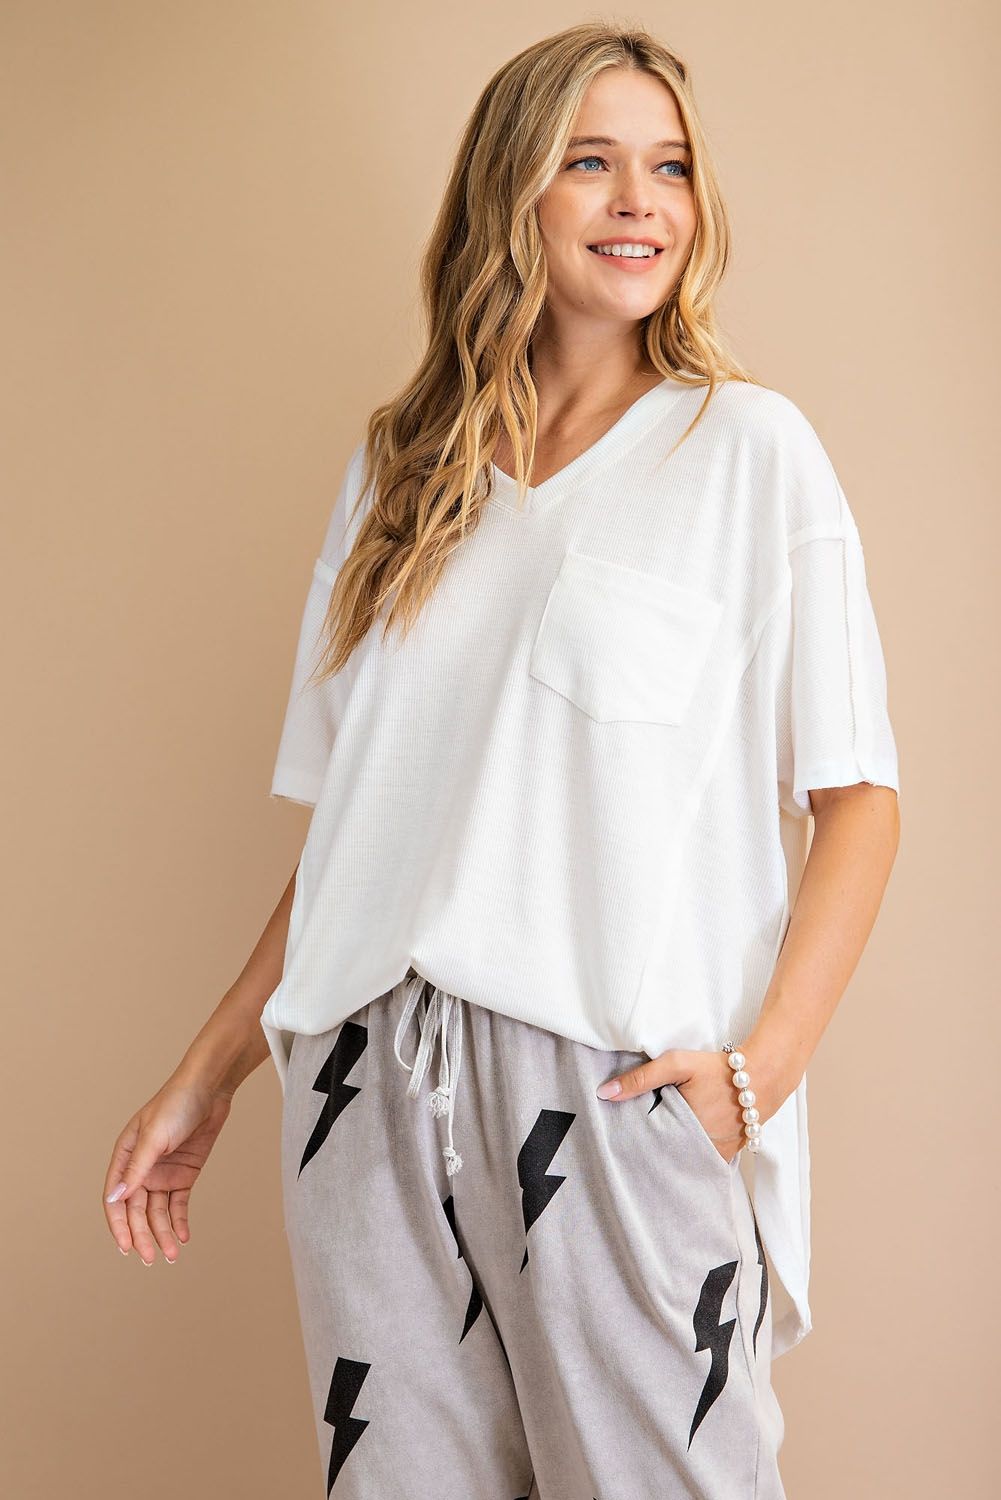 Whisper Loose Fit Top - Short sleeve ribbed loose fit knit top  Ivy and Pearl Boutique   